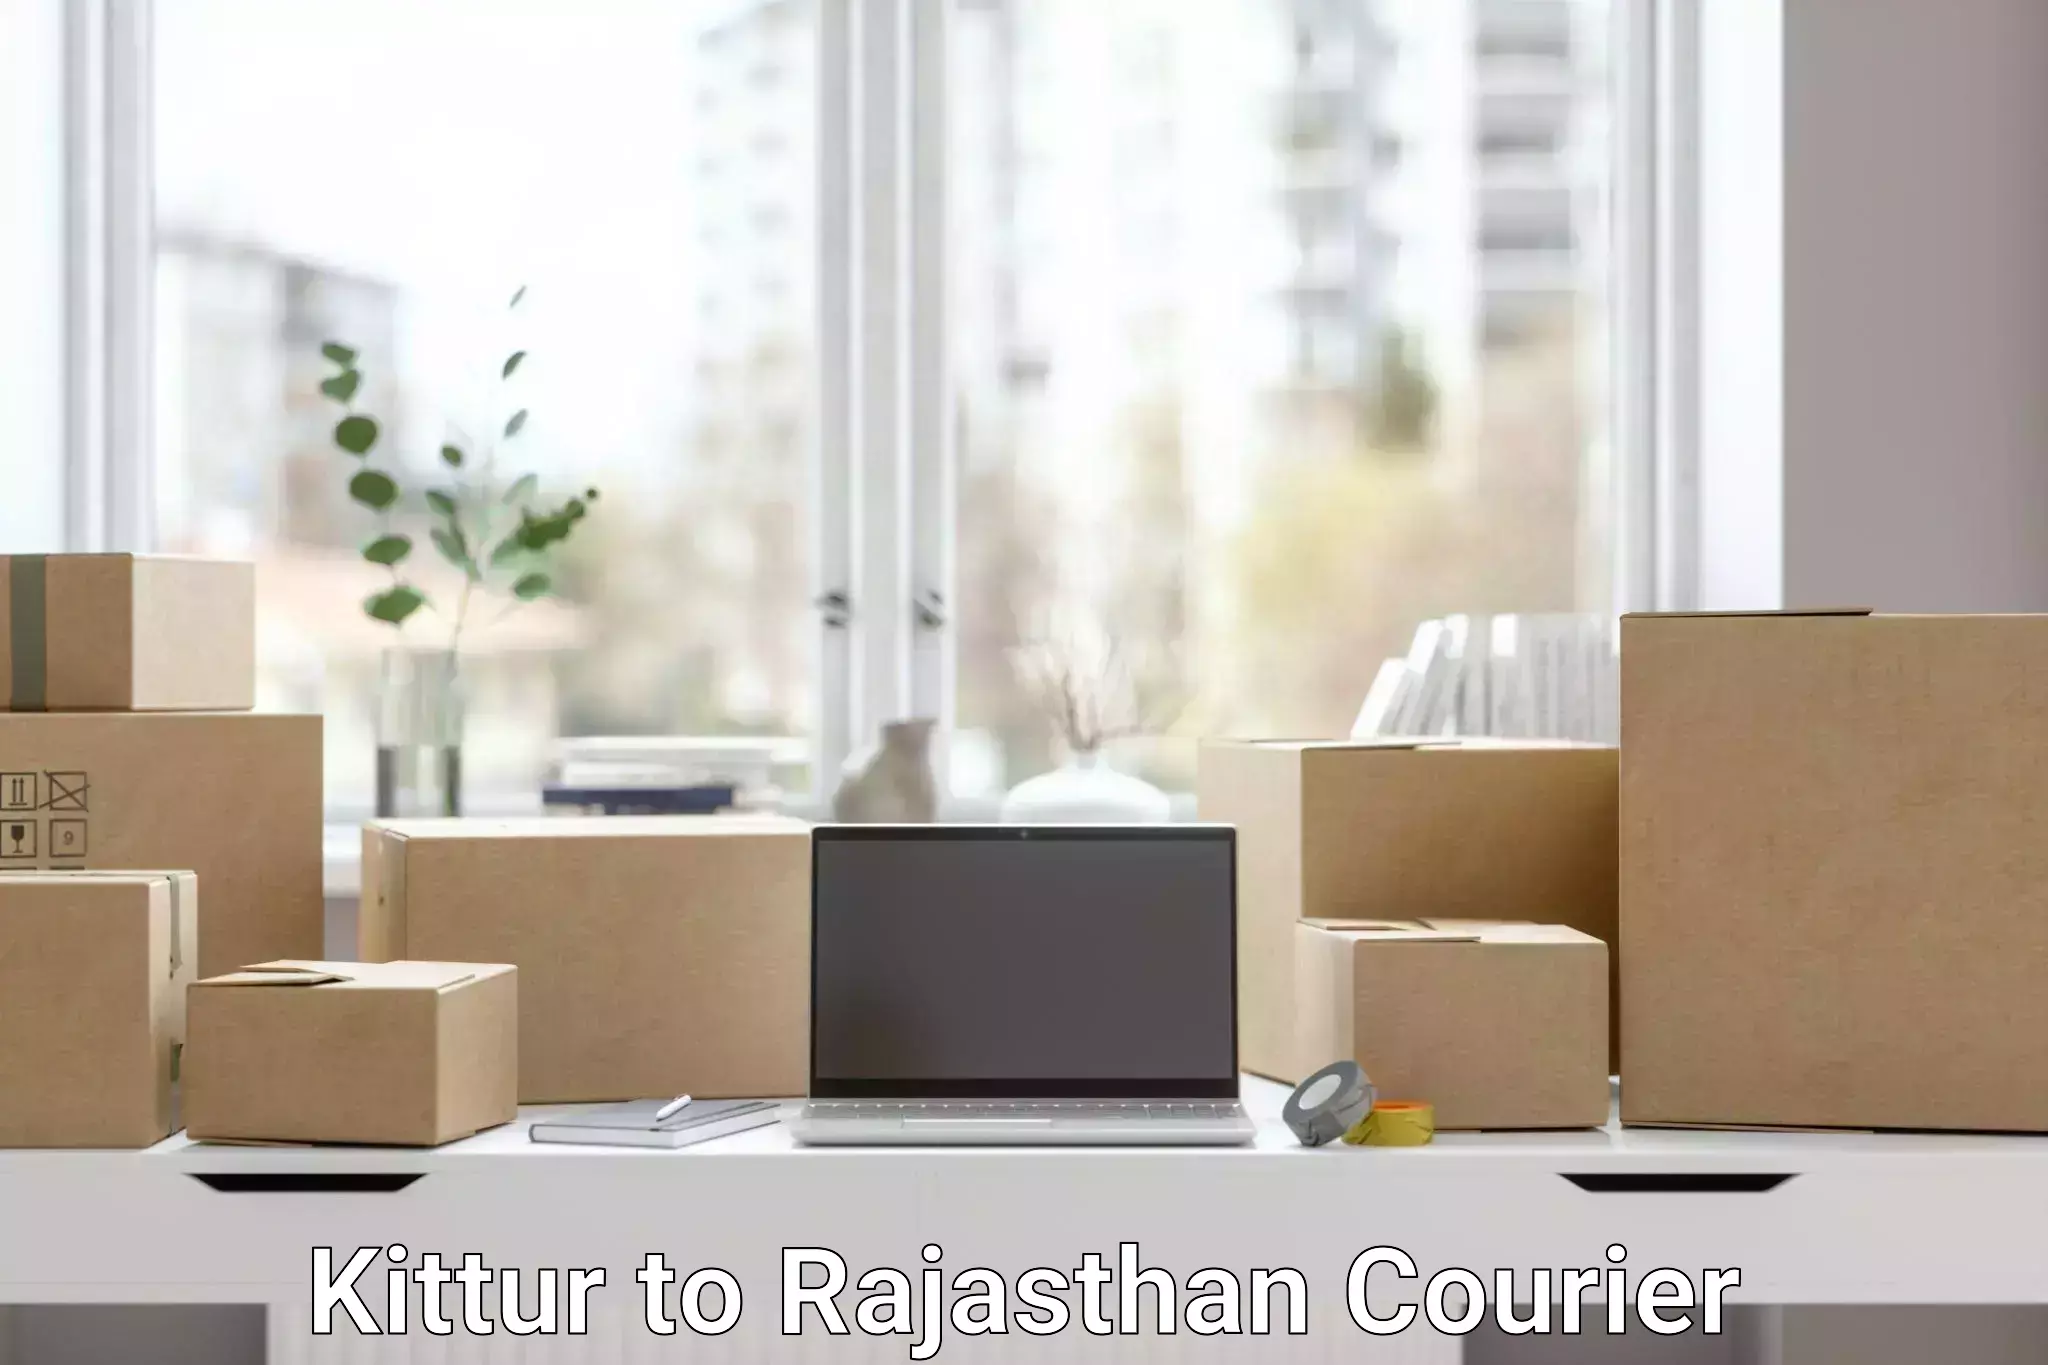 Delivery service partnership Kittur to Pali